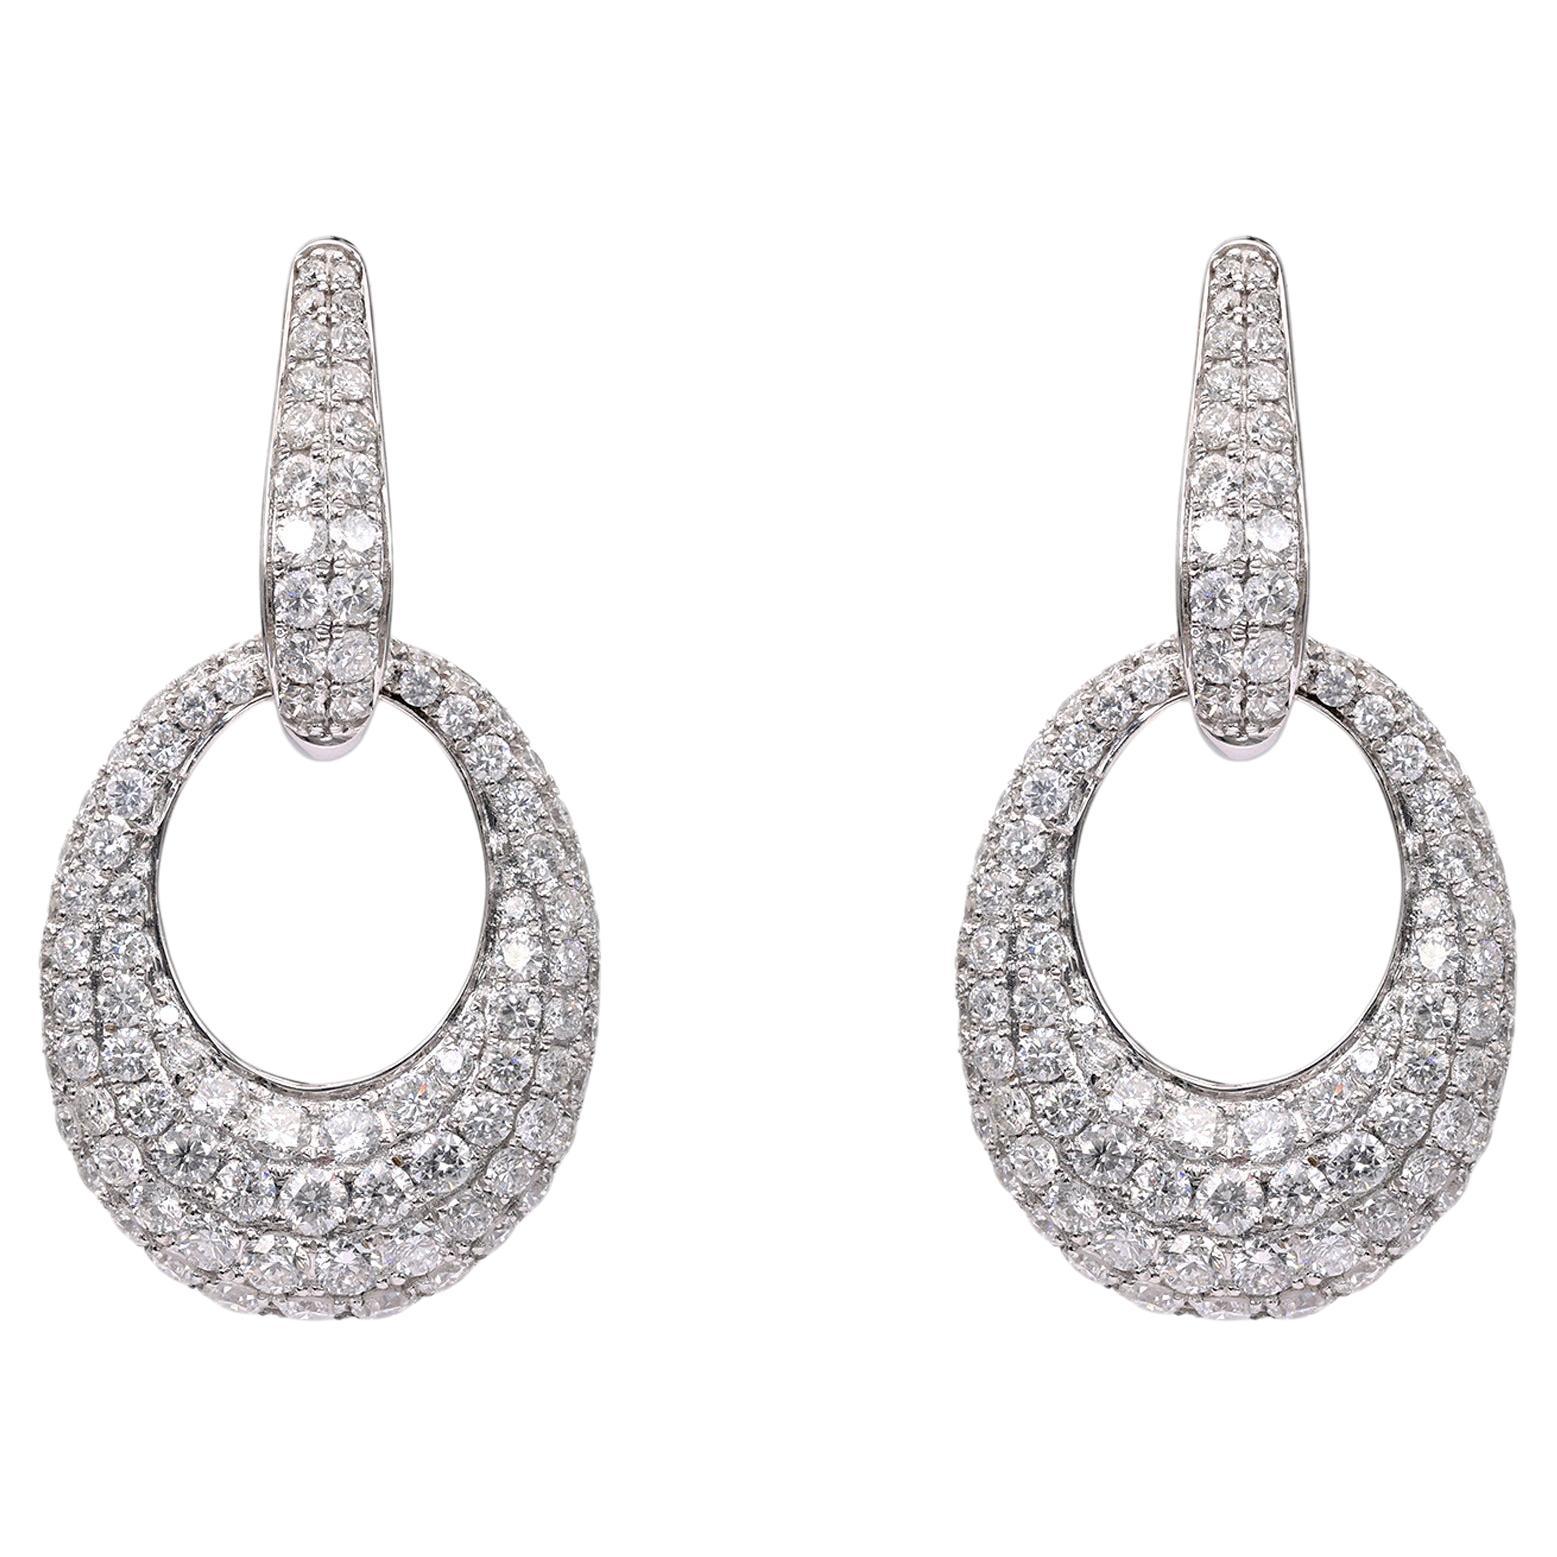 4.99 Carat Total Weight Diamond 18k White Gold Day to Night Earrings